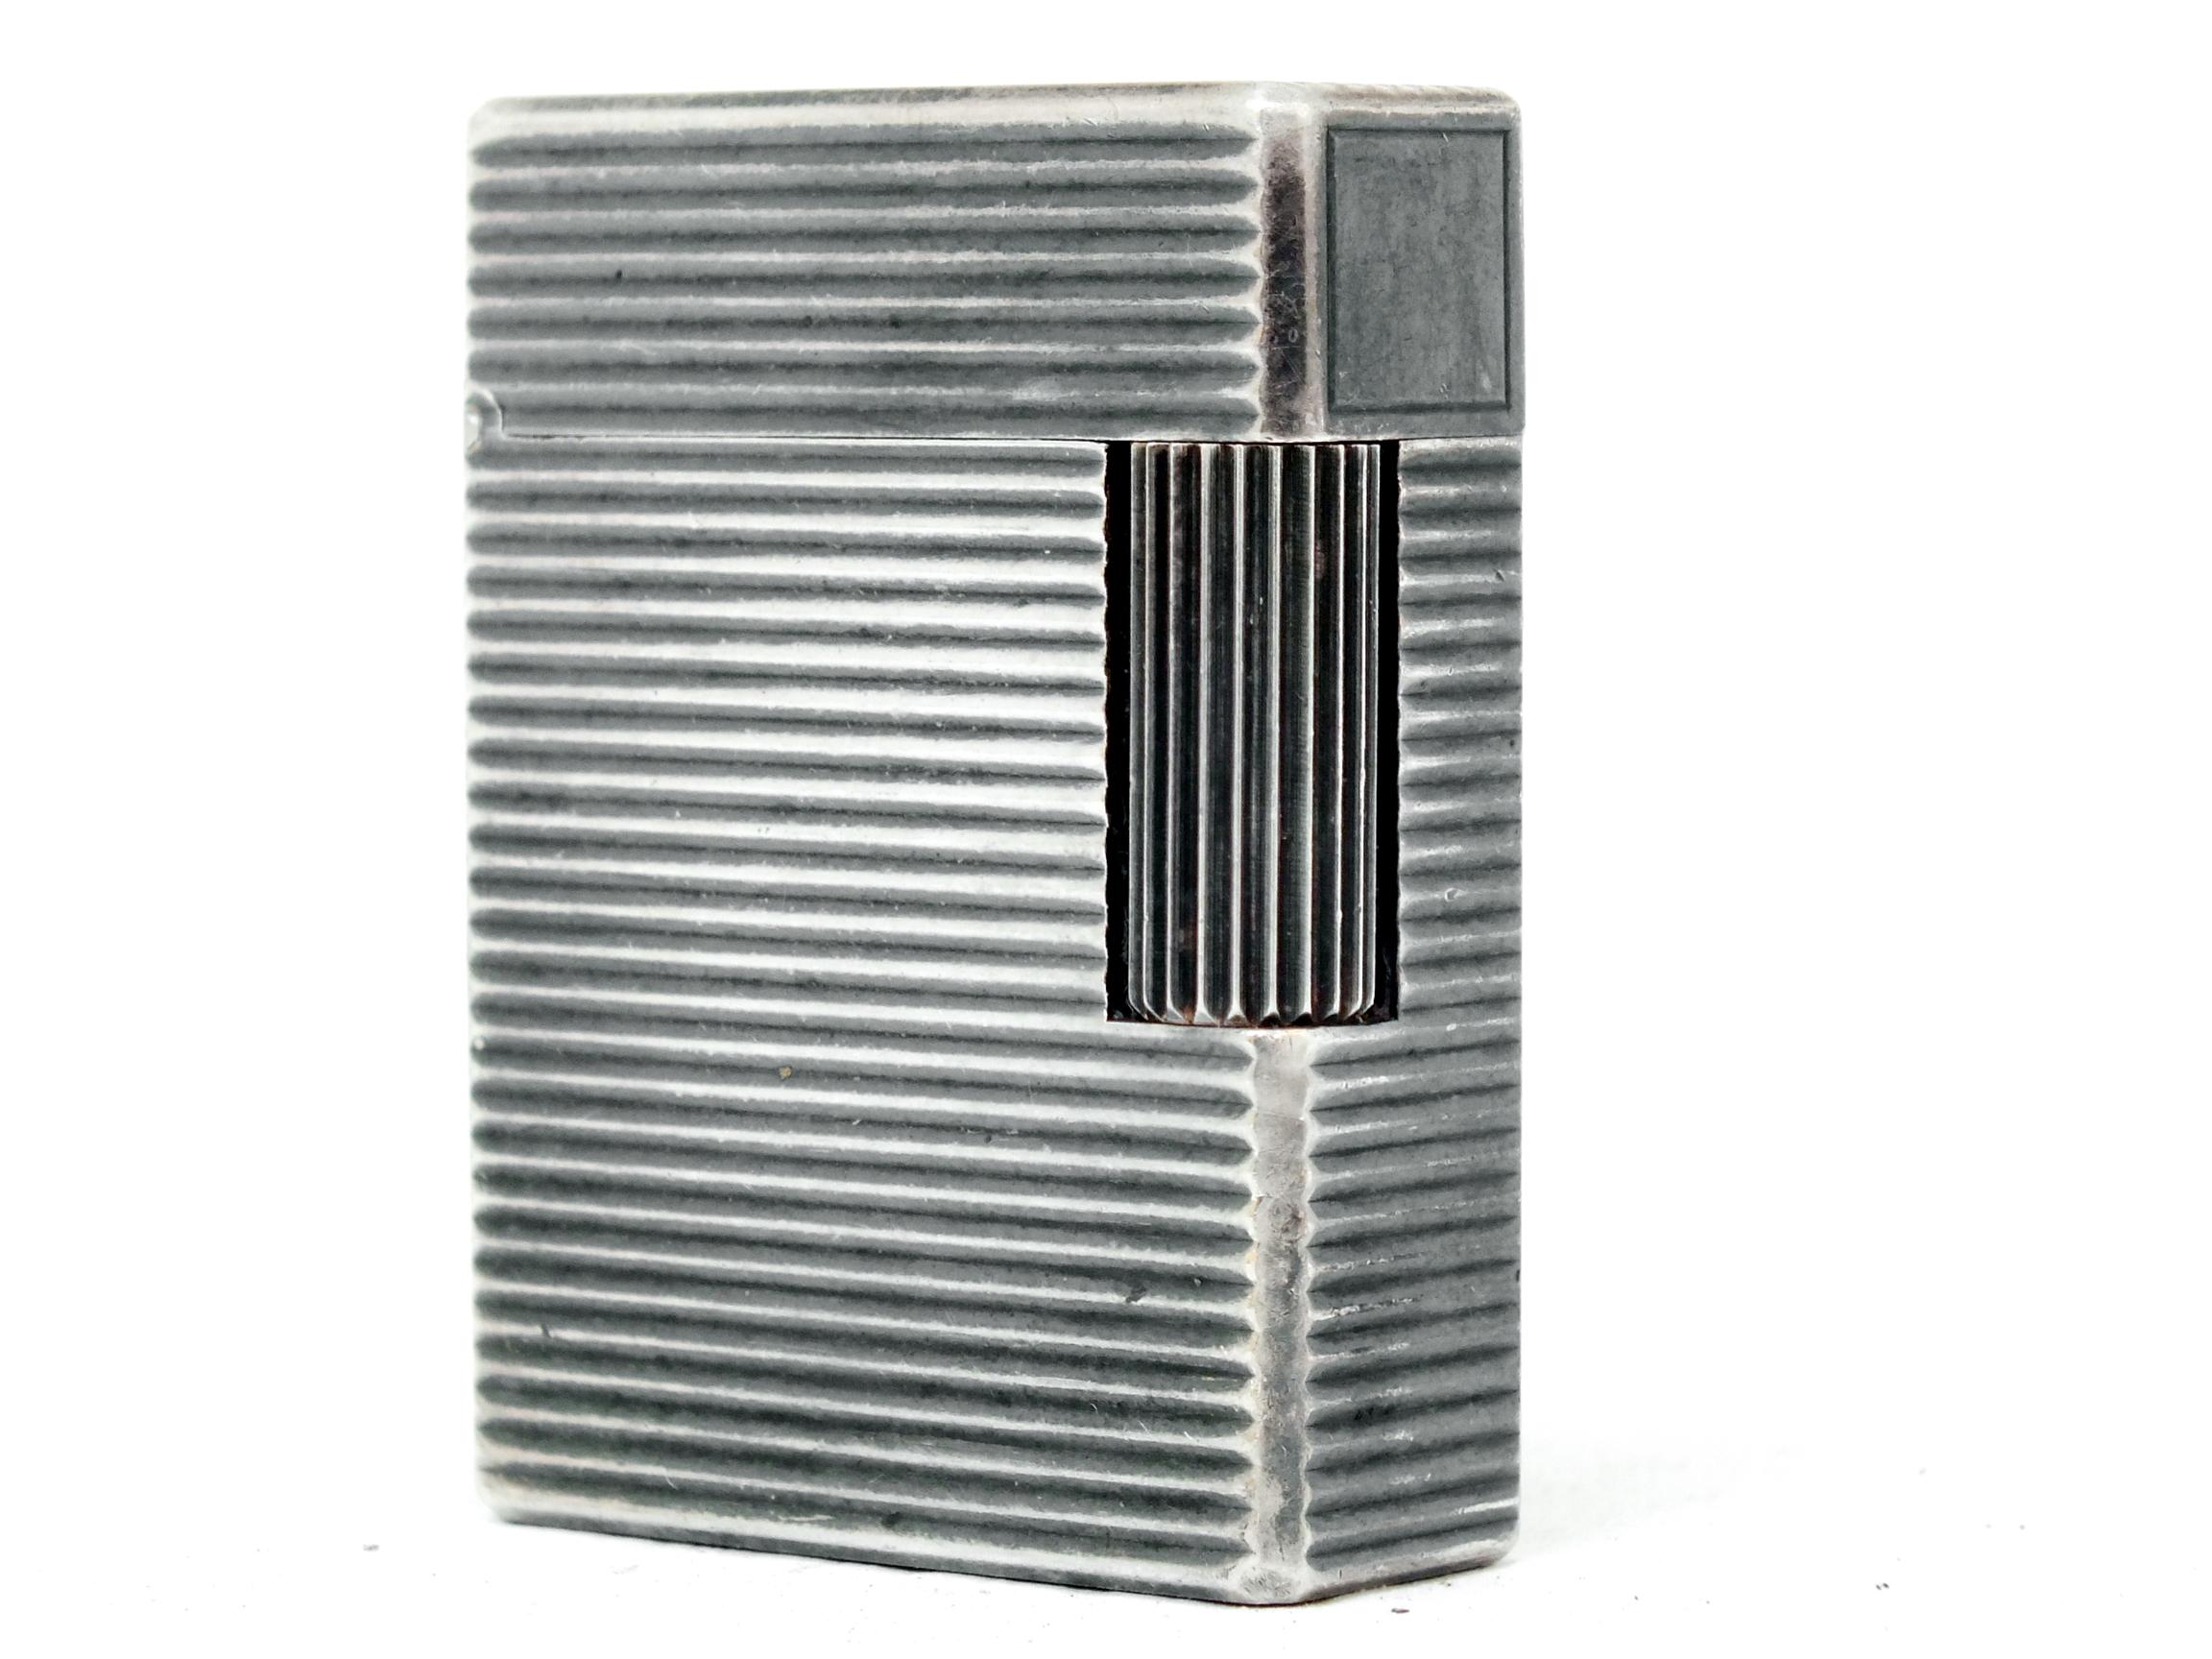 S.T. Dupont France lighter sophisticated horizontal line1 first edit two tone silverplate and gold-rose color design in years '60 and is in good used vintage condition and working